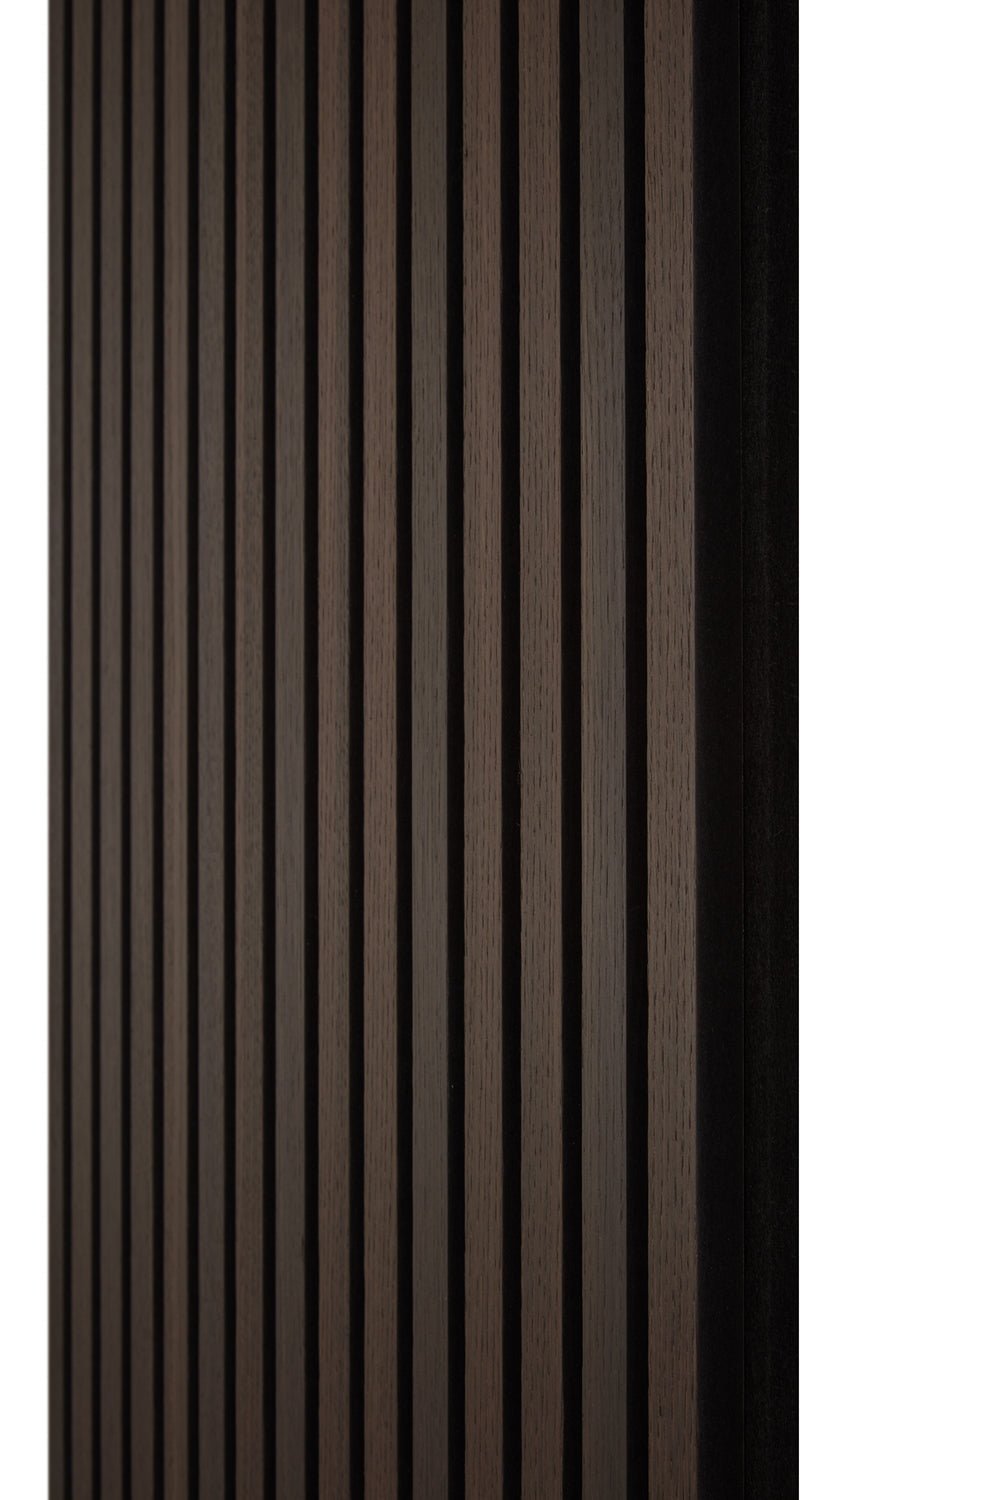 Side view of the Smoked Oak Acoustic SlatWall Panel from Naturewall, on felt backing. 

